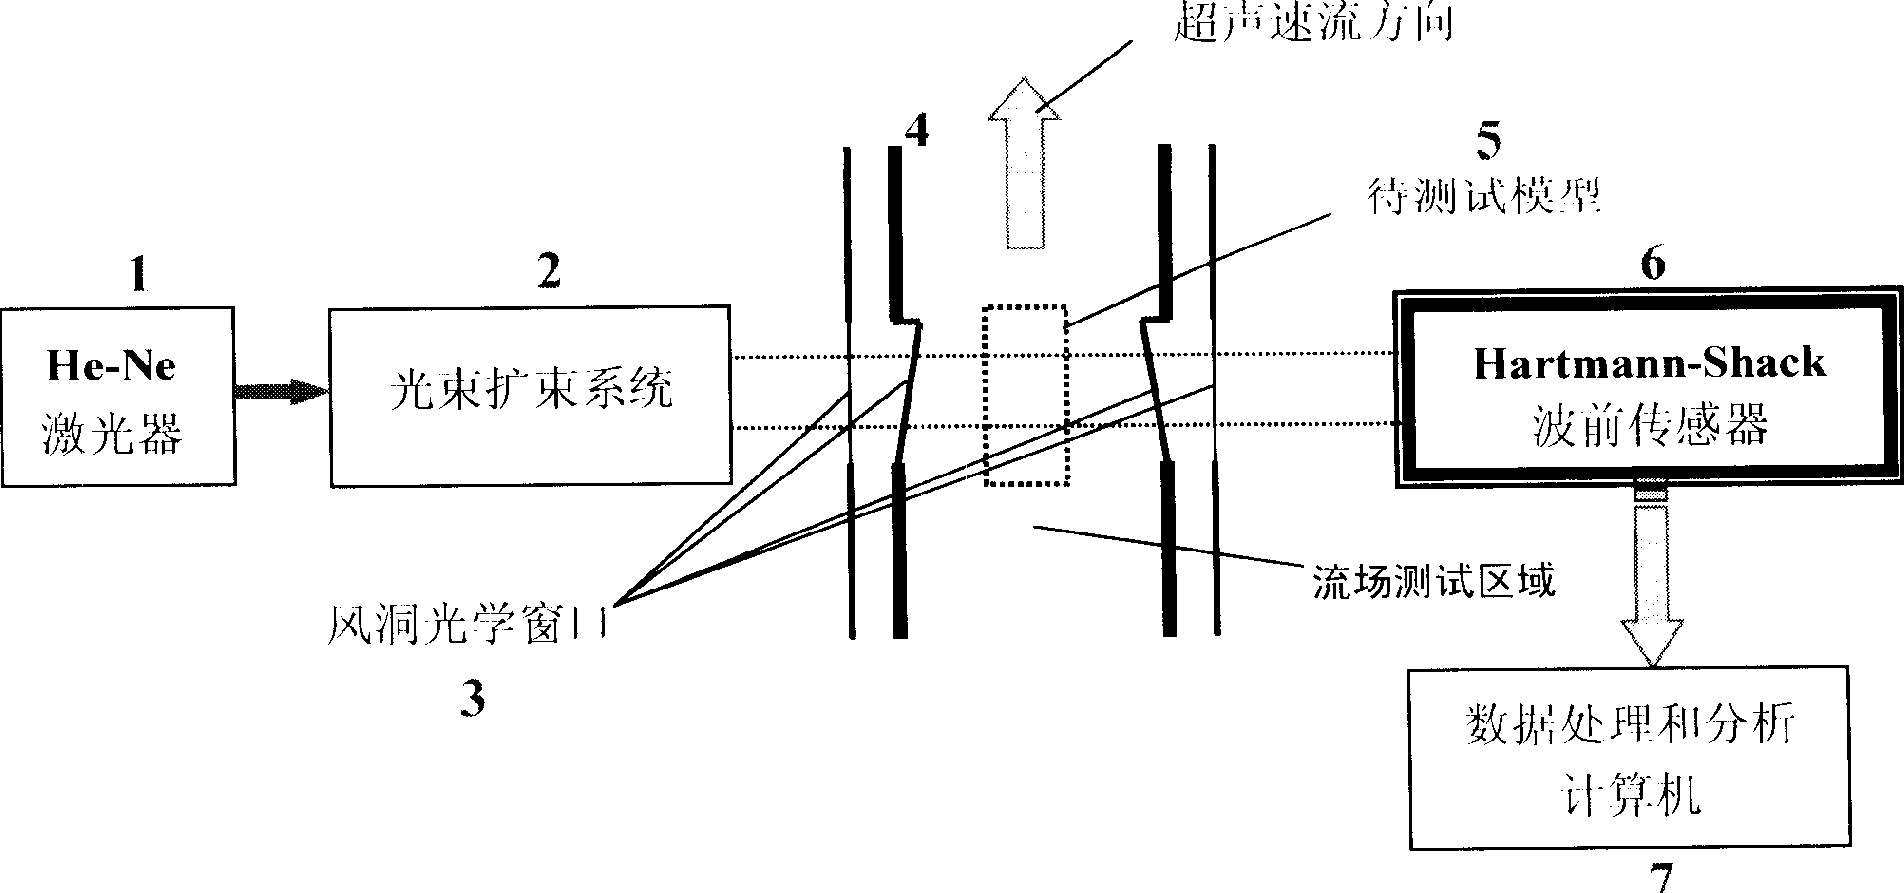 Supersonic speed flow field detection system based on H-S wave front sensor and detection method thereof